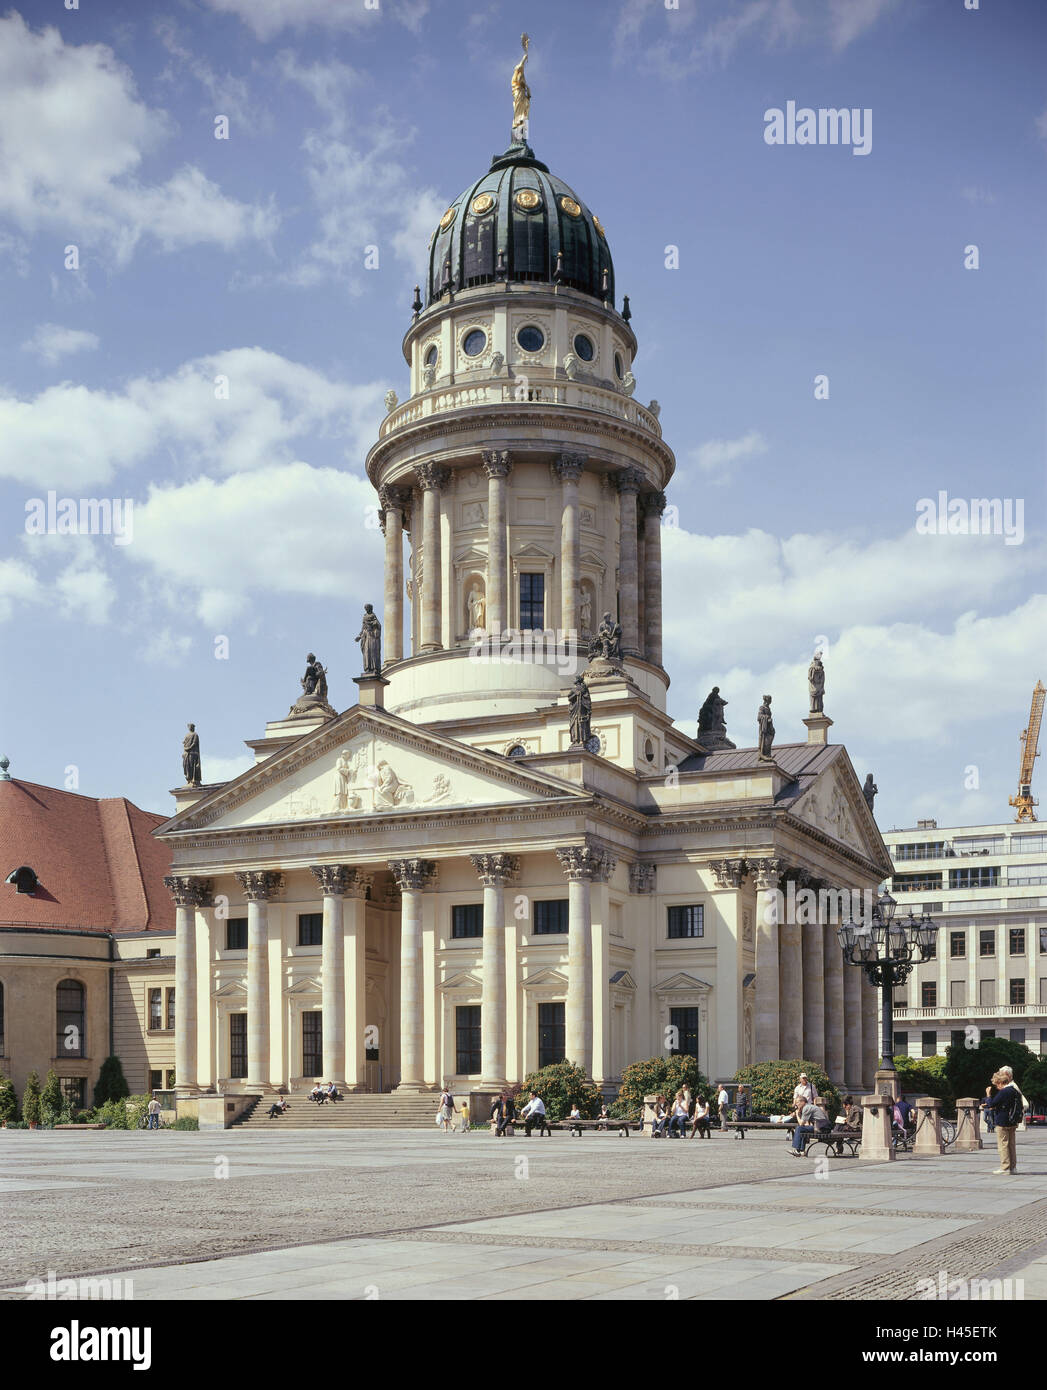 Germany, Berlin, gendarme's market, French cathedral, monument, tourist, Europe, town, capital, dome tower, tower, dome, structure, architecture, landmark, place of interest, destination, tourism, church, sacred construction, church, architecture, outside, people, tourists, tourism, faith, religion, Christianity, Stock Photo